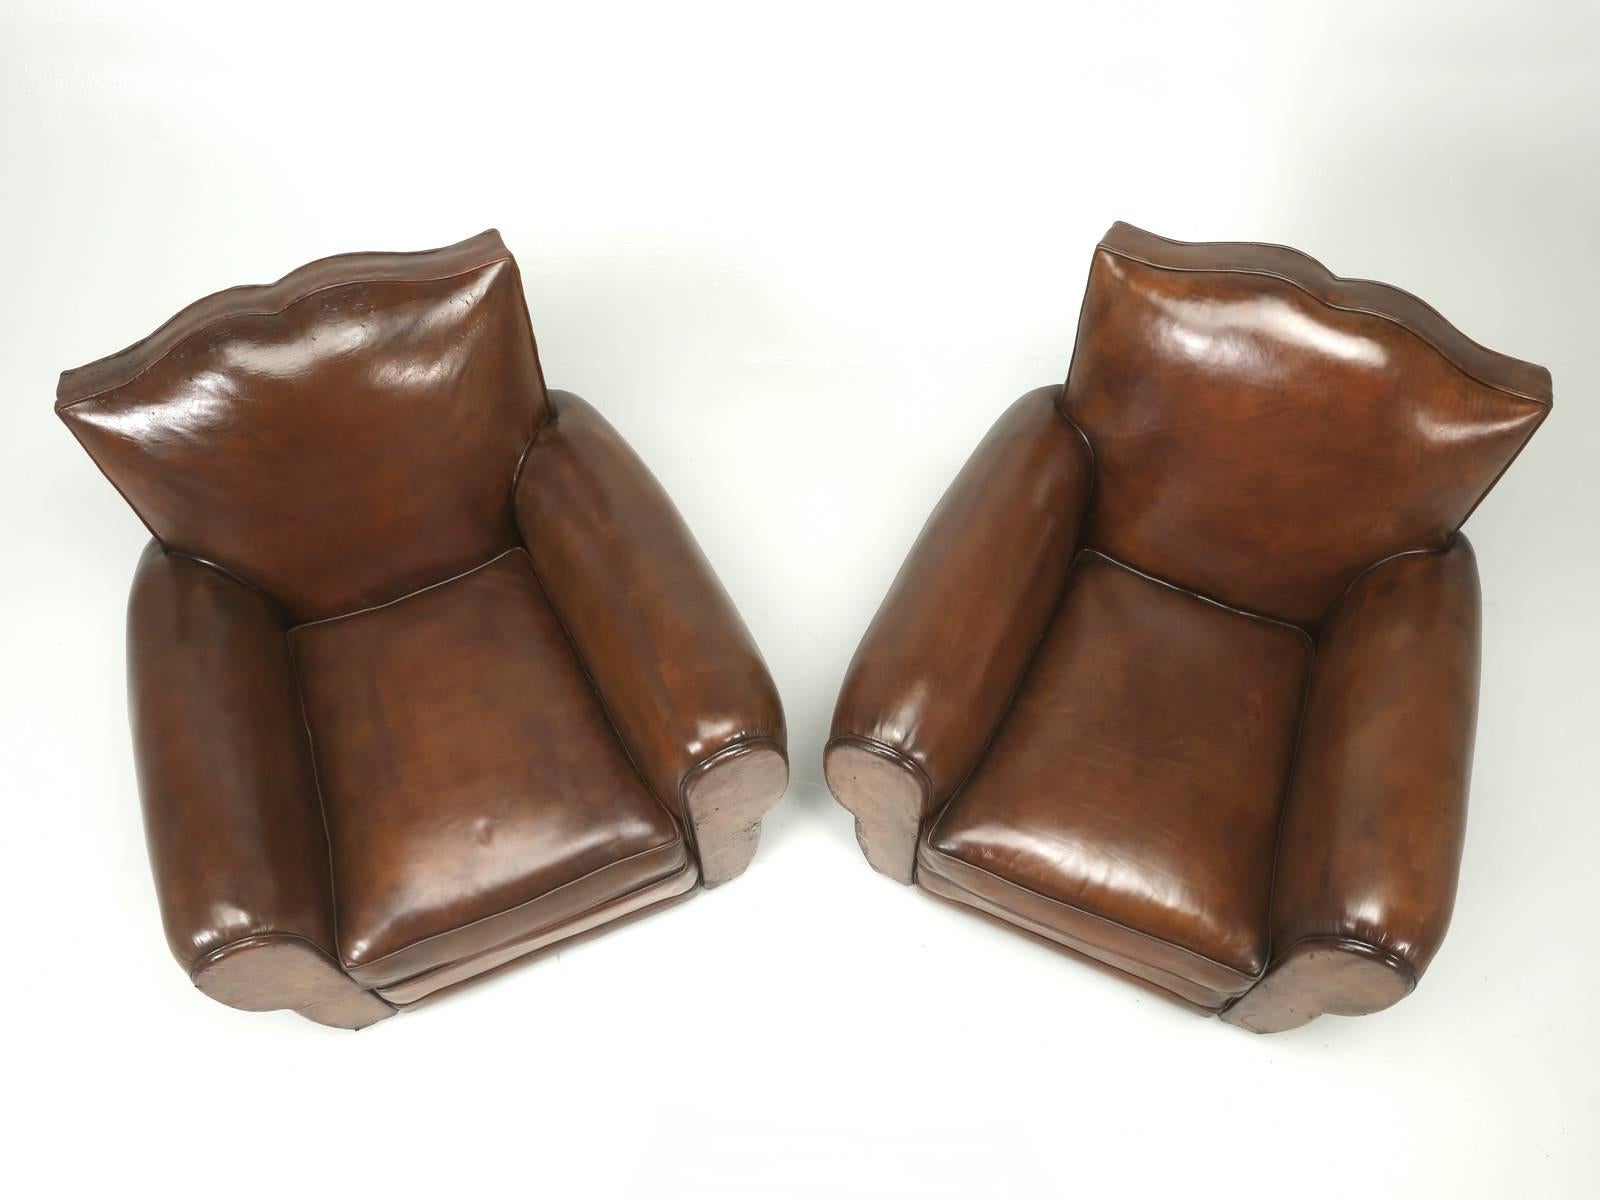 Matched pair of French Art Deco “Moustache” original leather club chairs. Our in-house upholstery department, carefully disassembled the chairs down to their bare wood frame and began the laborious task of rebuilding everything from the ground up,